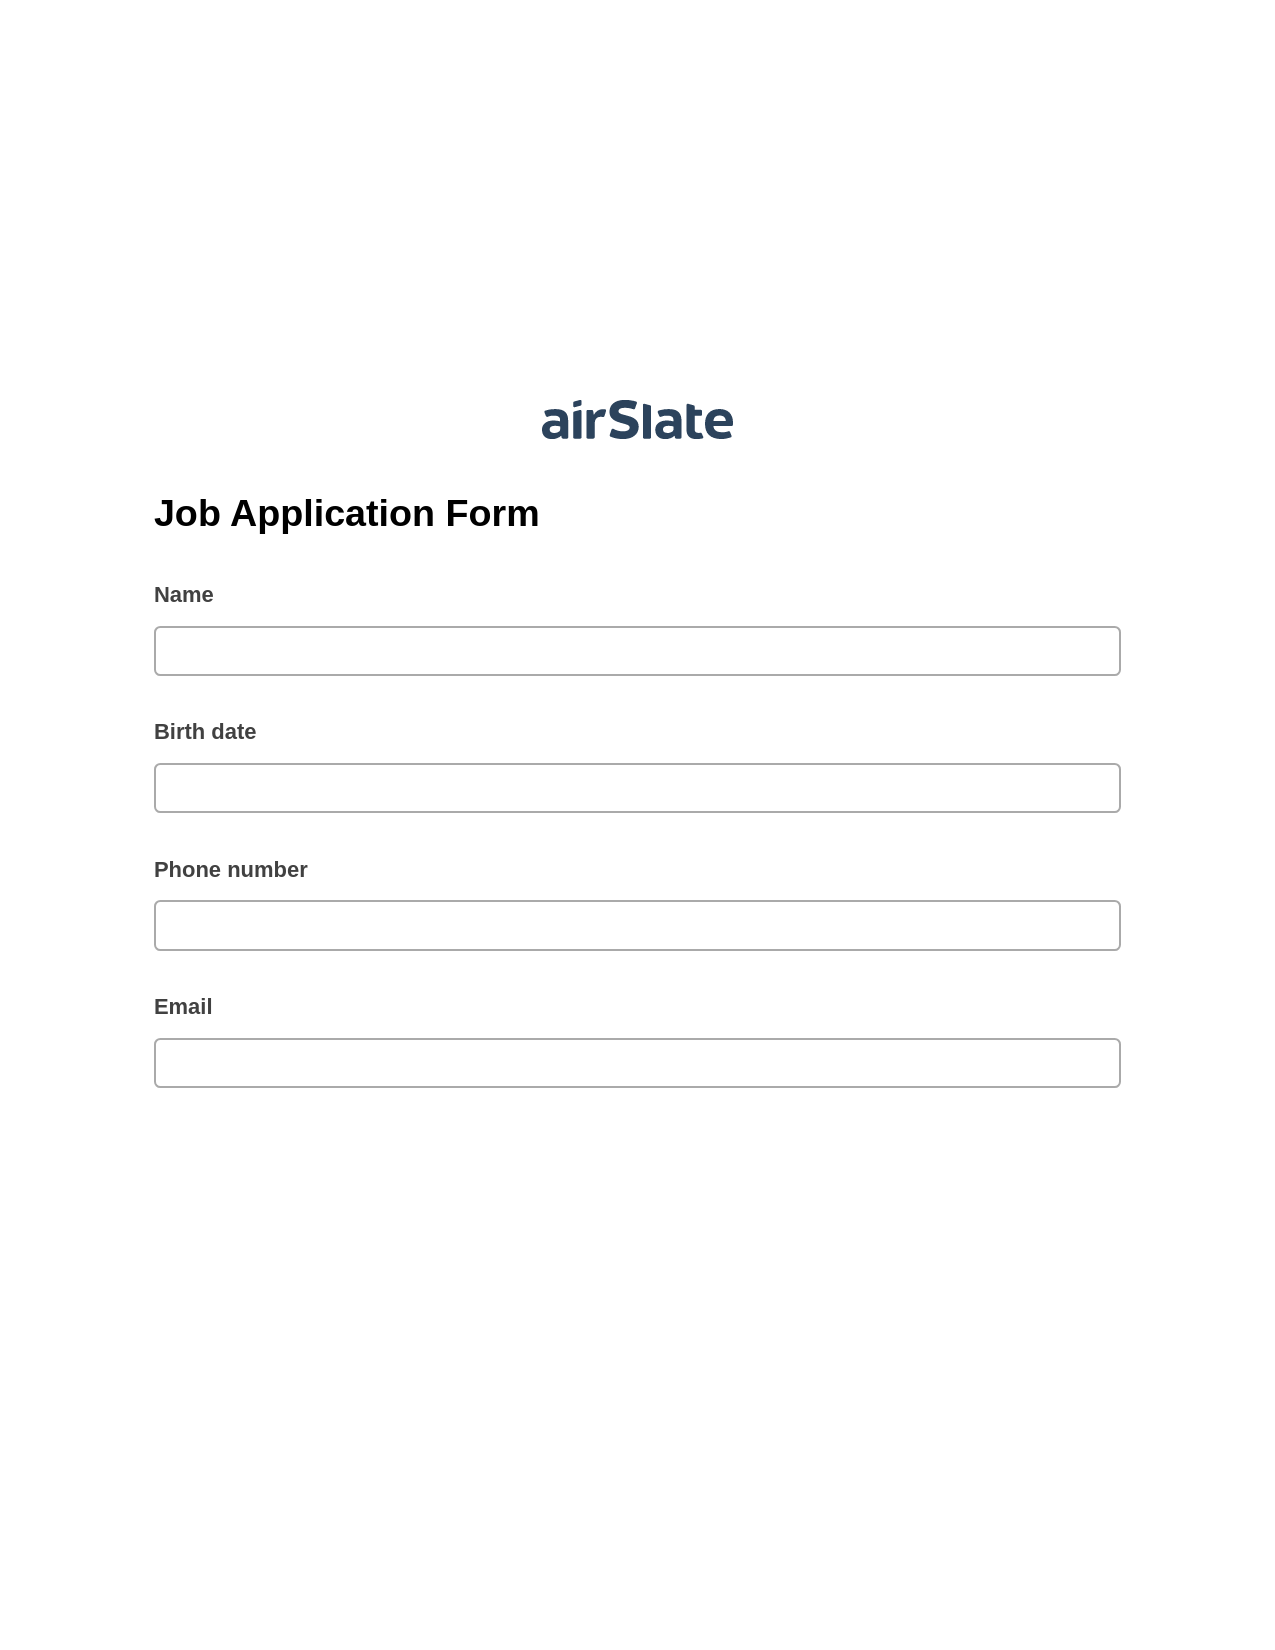 Multirole Job Application Form Pre-fill from Google Sheets Bot, Email Notification Bot, Export to MySQL Bot